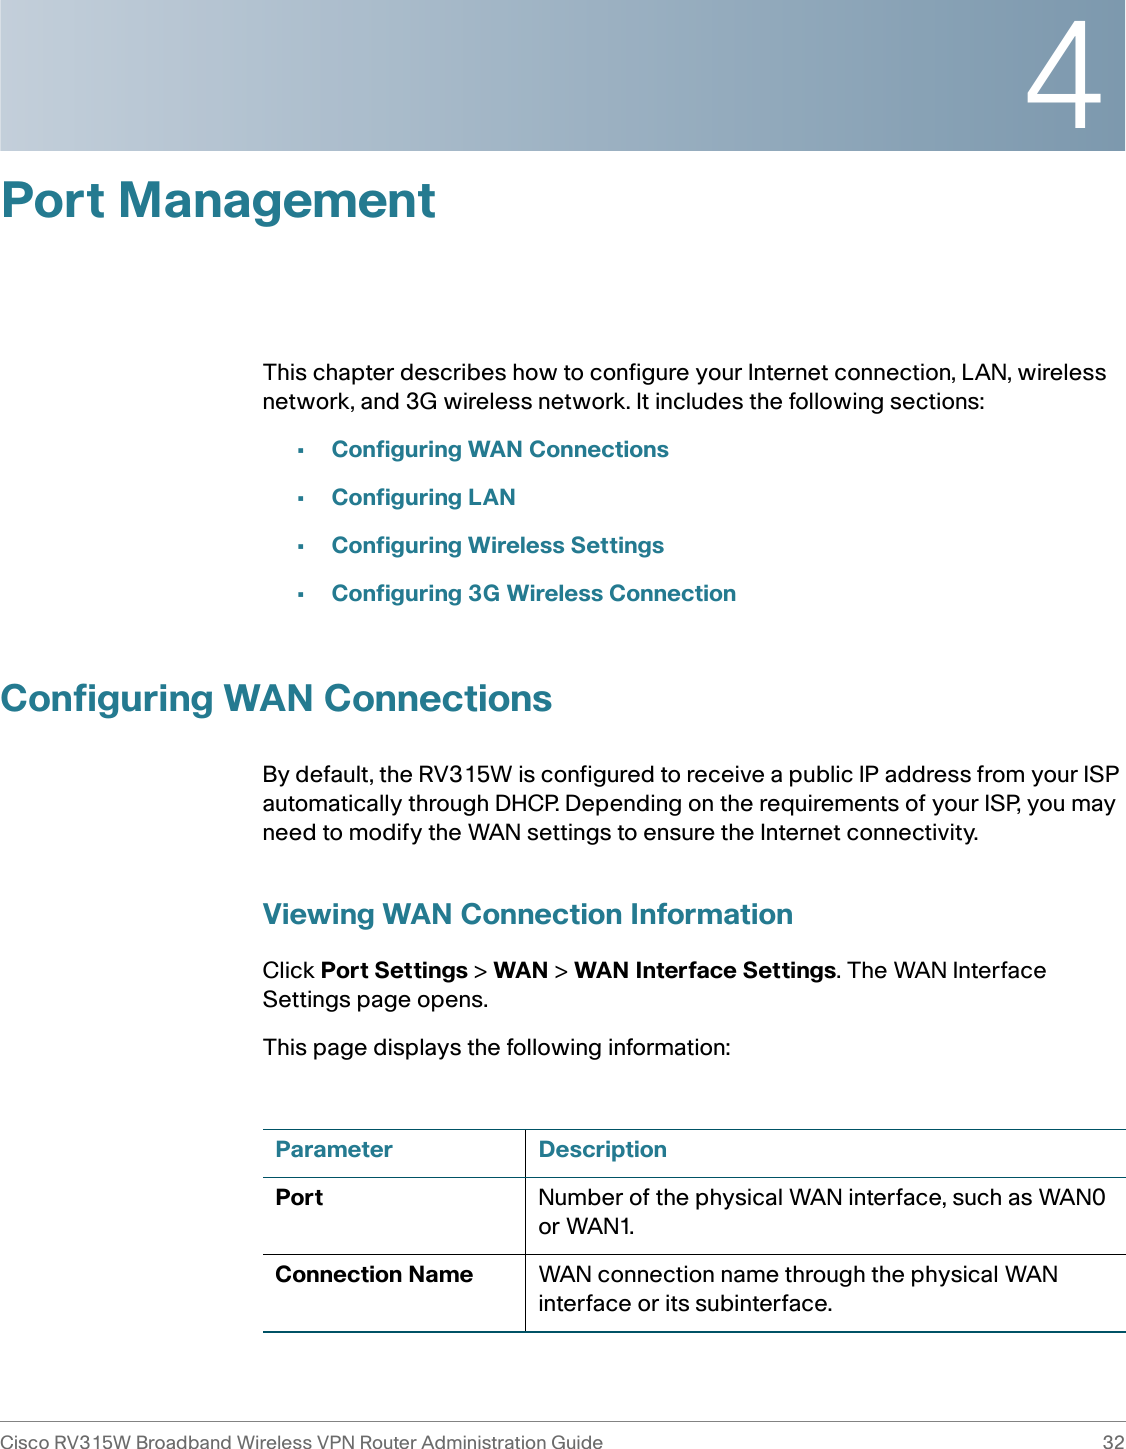 4Cisco RV315W Broadband Wireless VPN Router Administration Guide 32Port ManagementThis chapter describes how to configure your Internet connection, LAN, wireless network, and 3G wireless network. It includes the following sections:•Configuring WAN Connections•Configuring LAN•Configuring Wireless Settings•Configuring 3G Wireless ConnectionConfiguring WAN ConnectionsBy default, the RV315W is configured to receive a public IP address from your ISP automatically through DHCP. Depending on the requirements of your ISP, you may need to modify the WAN settings to ensure the Internet connectivity. Viewing WAN Connection InformationClick Port Settings &gt; WAN &gt; WAN Interface Settings. The WAN Interface Settings page opens.This page displays the following information: Parameter DescriptionPort Number of the physical WAN interface, such as WAN0 or WAN1.Connection Name WAN connection name through the physical WAN interface or its subinterface.